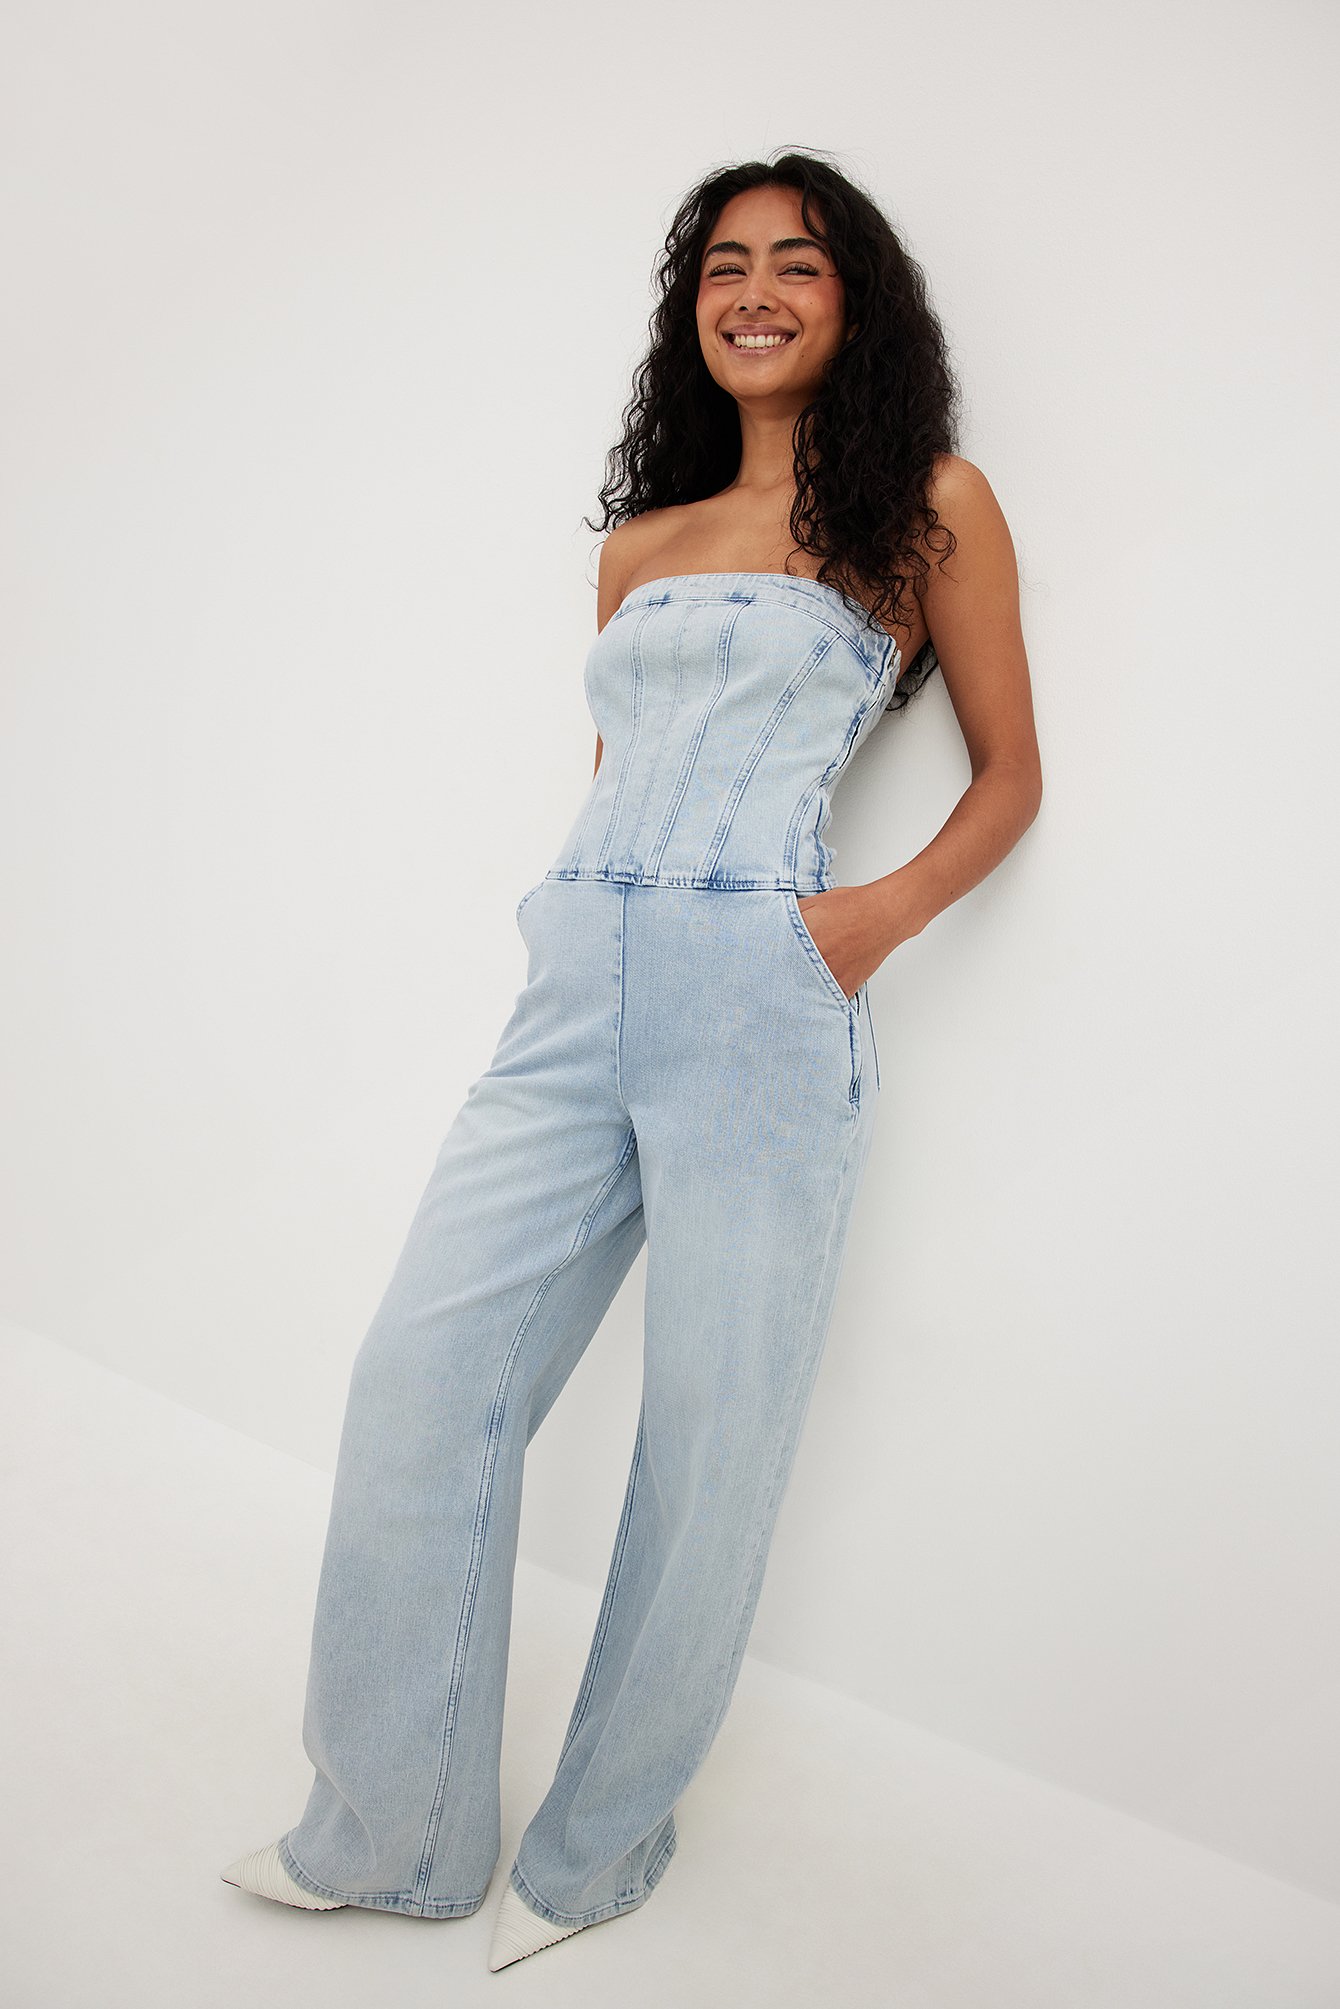 JOE'S JEANS The Tiana Jumpsuit in Admiration - Adorn